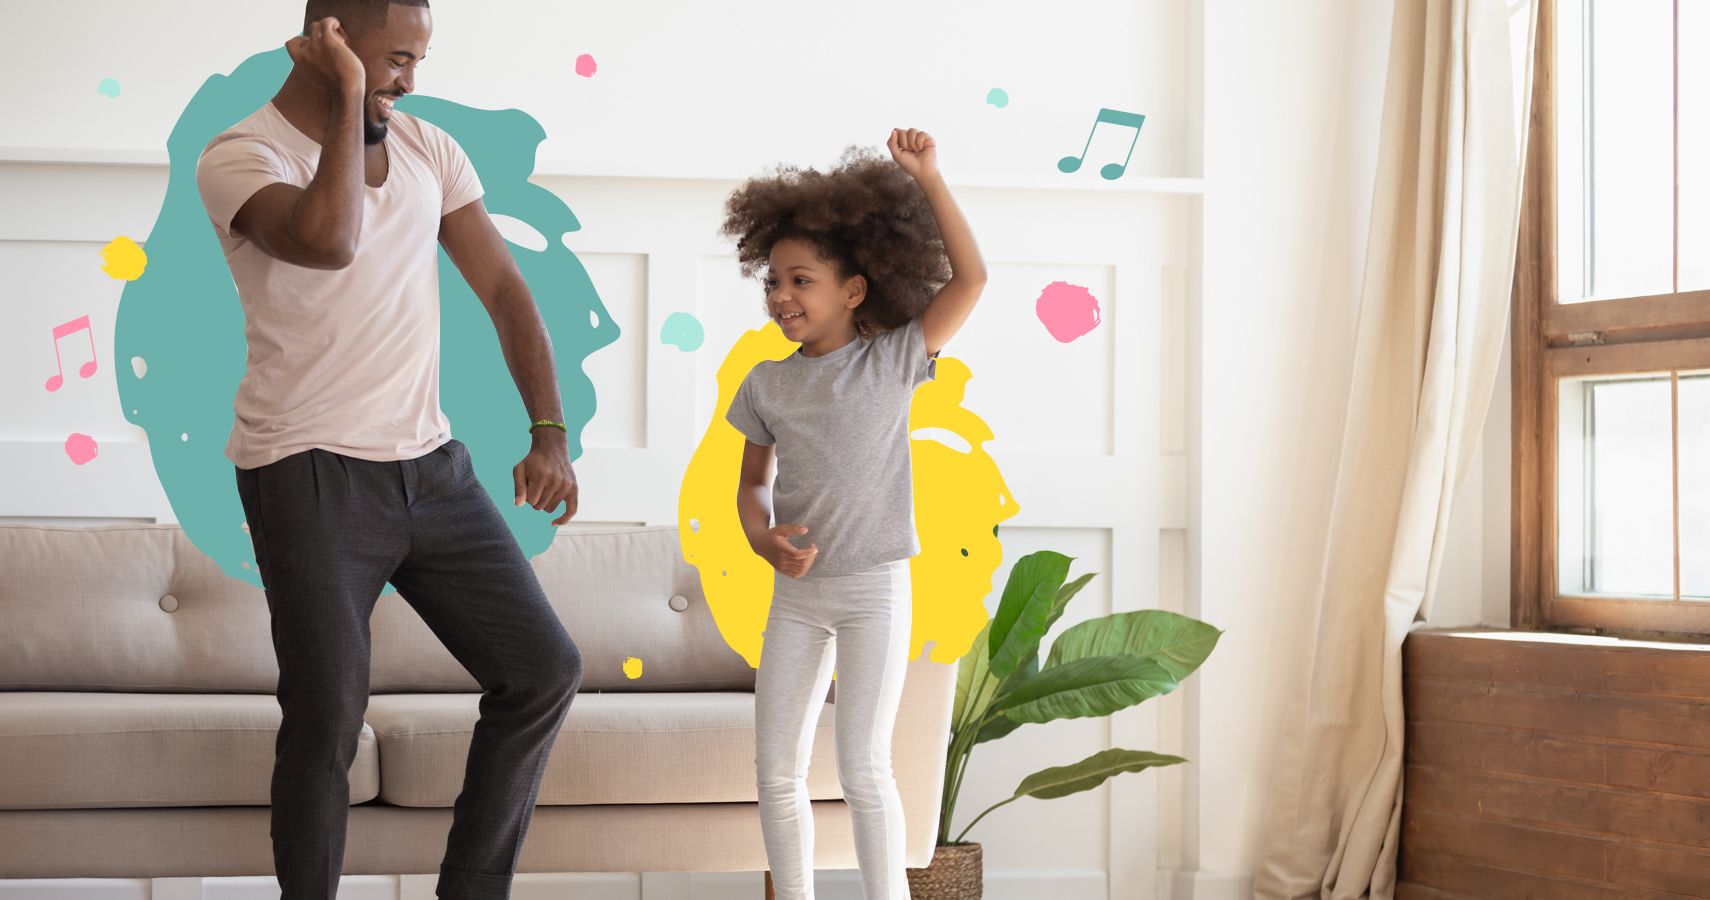 10 Of The Best Songs For Families To Listen To Together